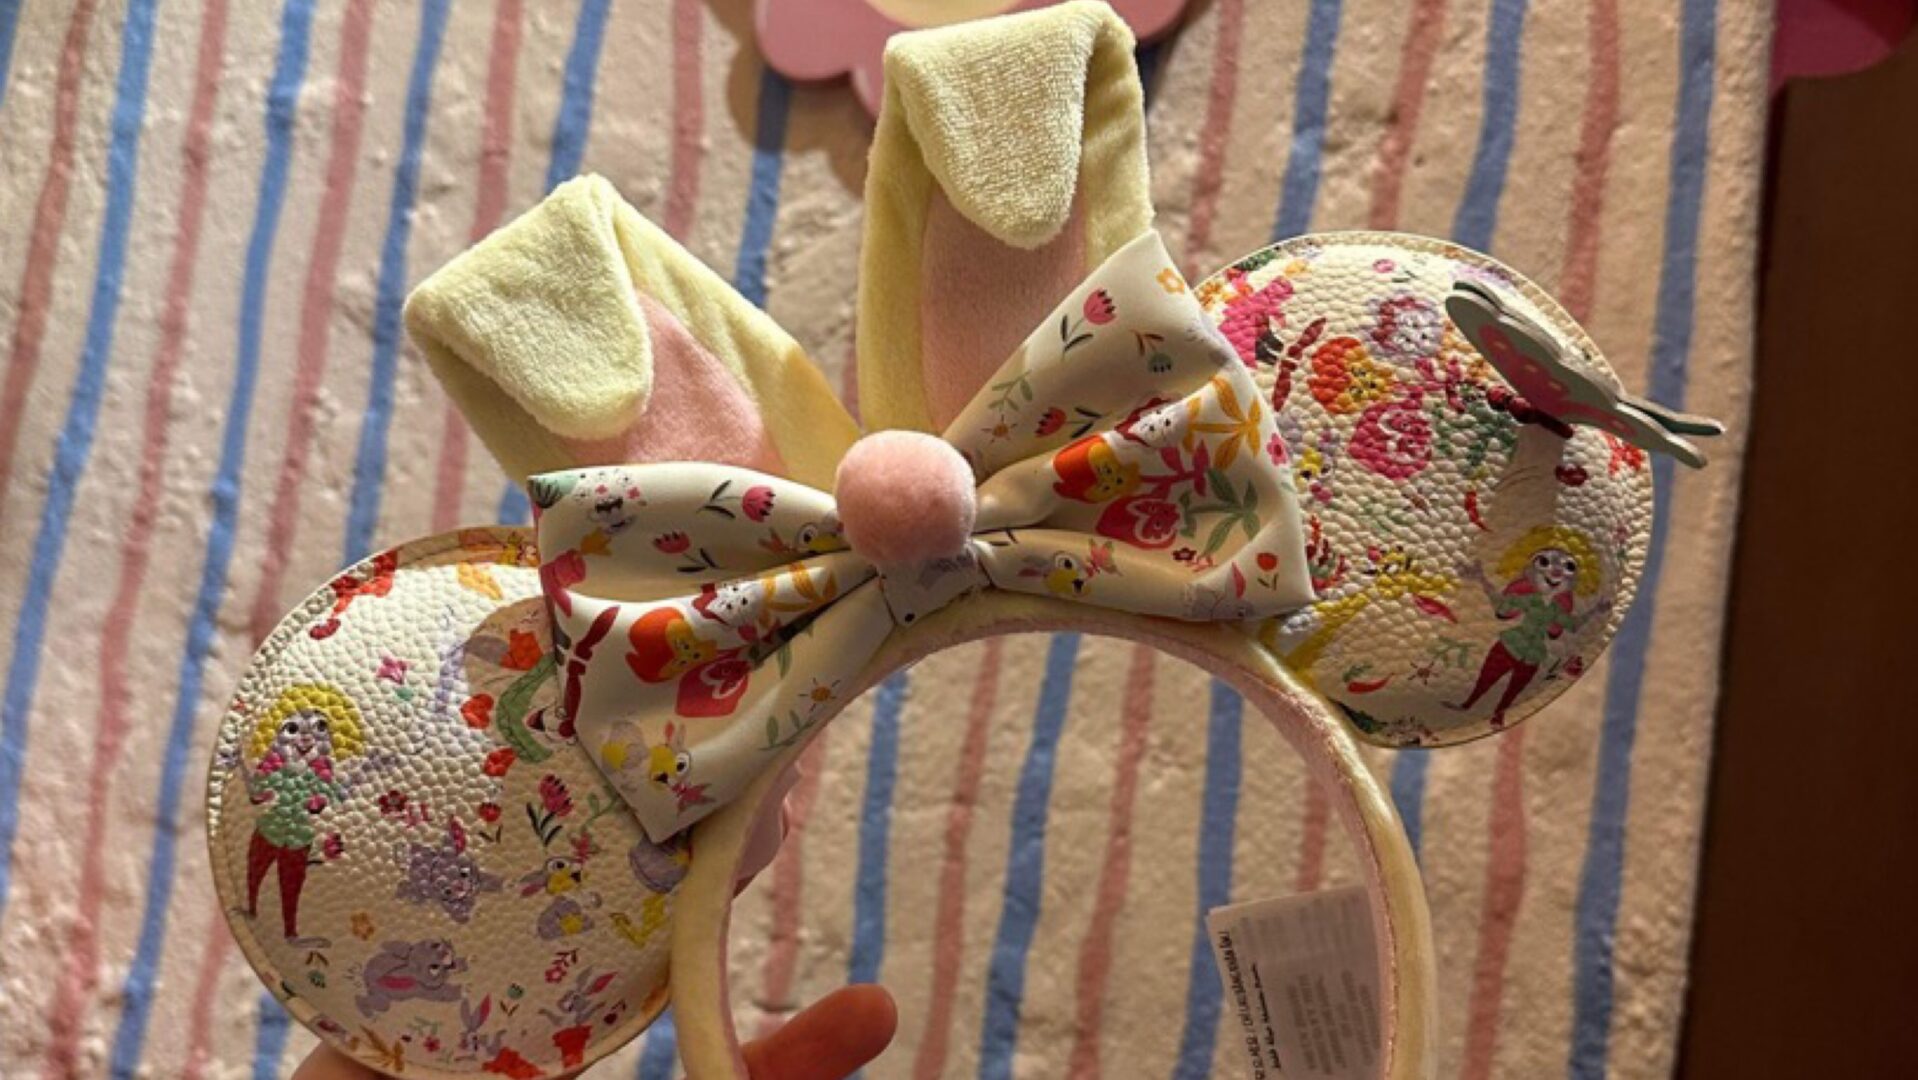 New Reigning Rabbits Ear Headband Is Perfect For Spring!